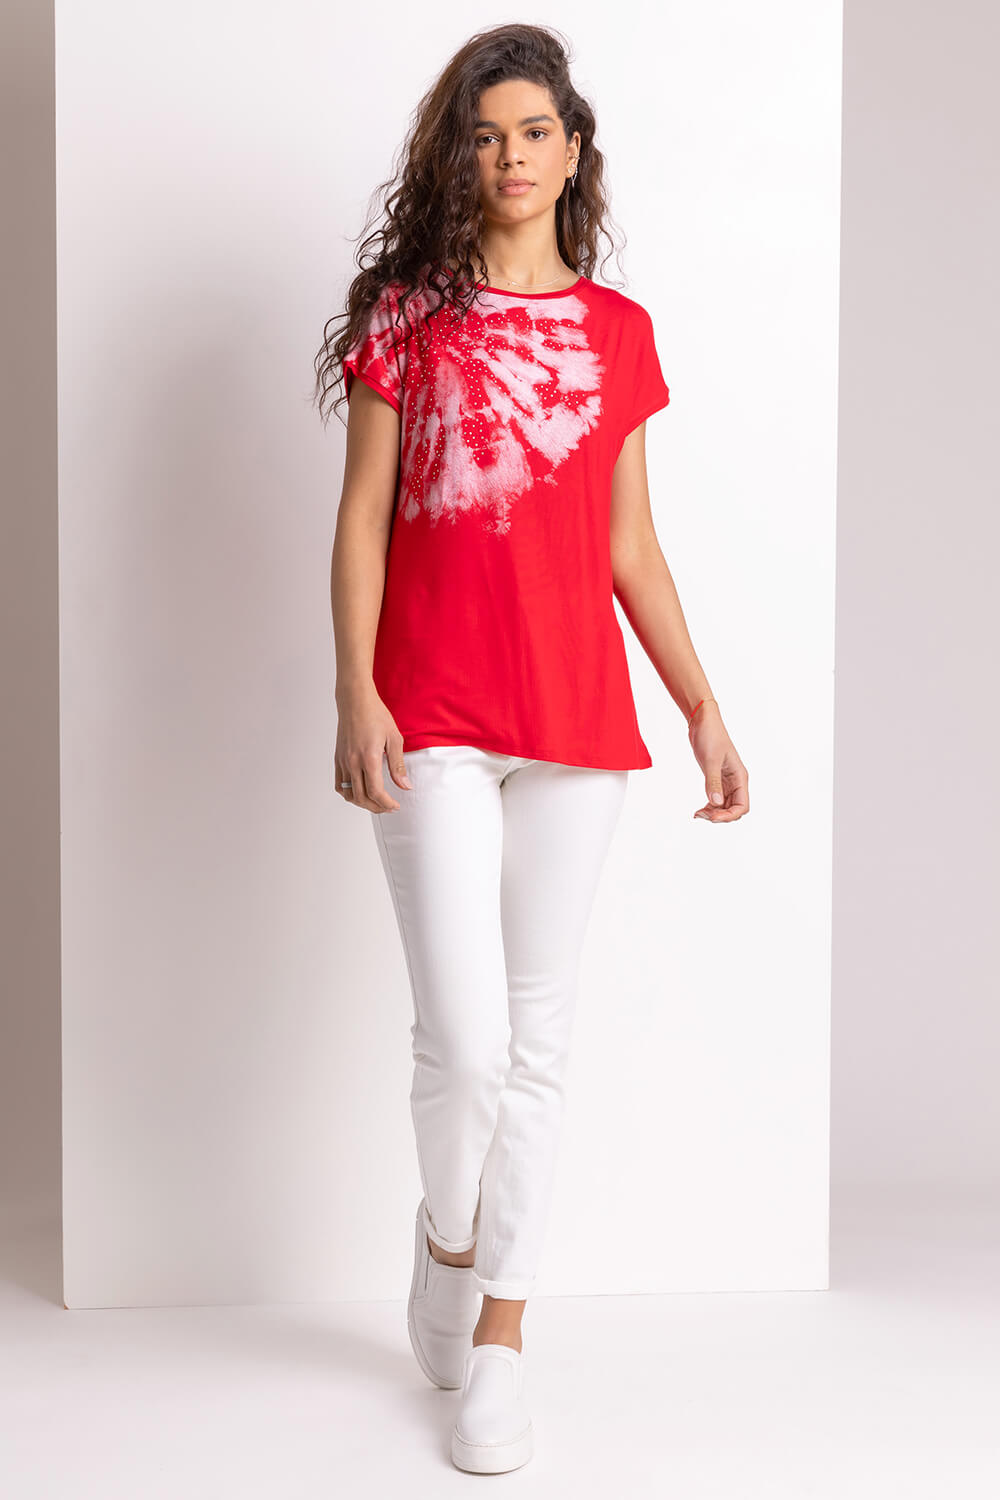 Red Embellished Tie Dye Print T-Shirt, Image 3 of 4